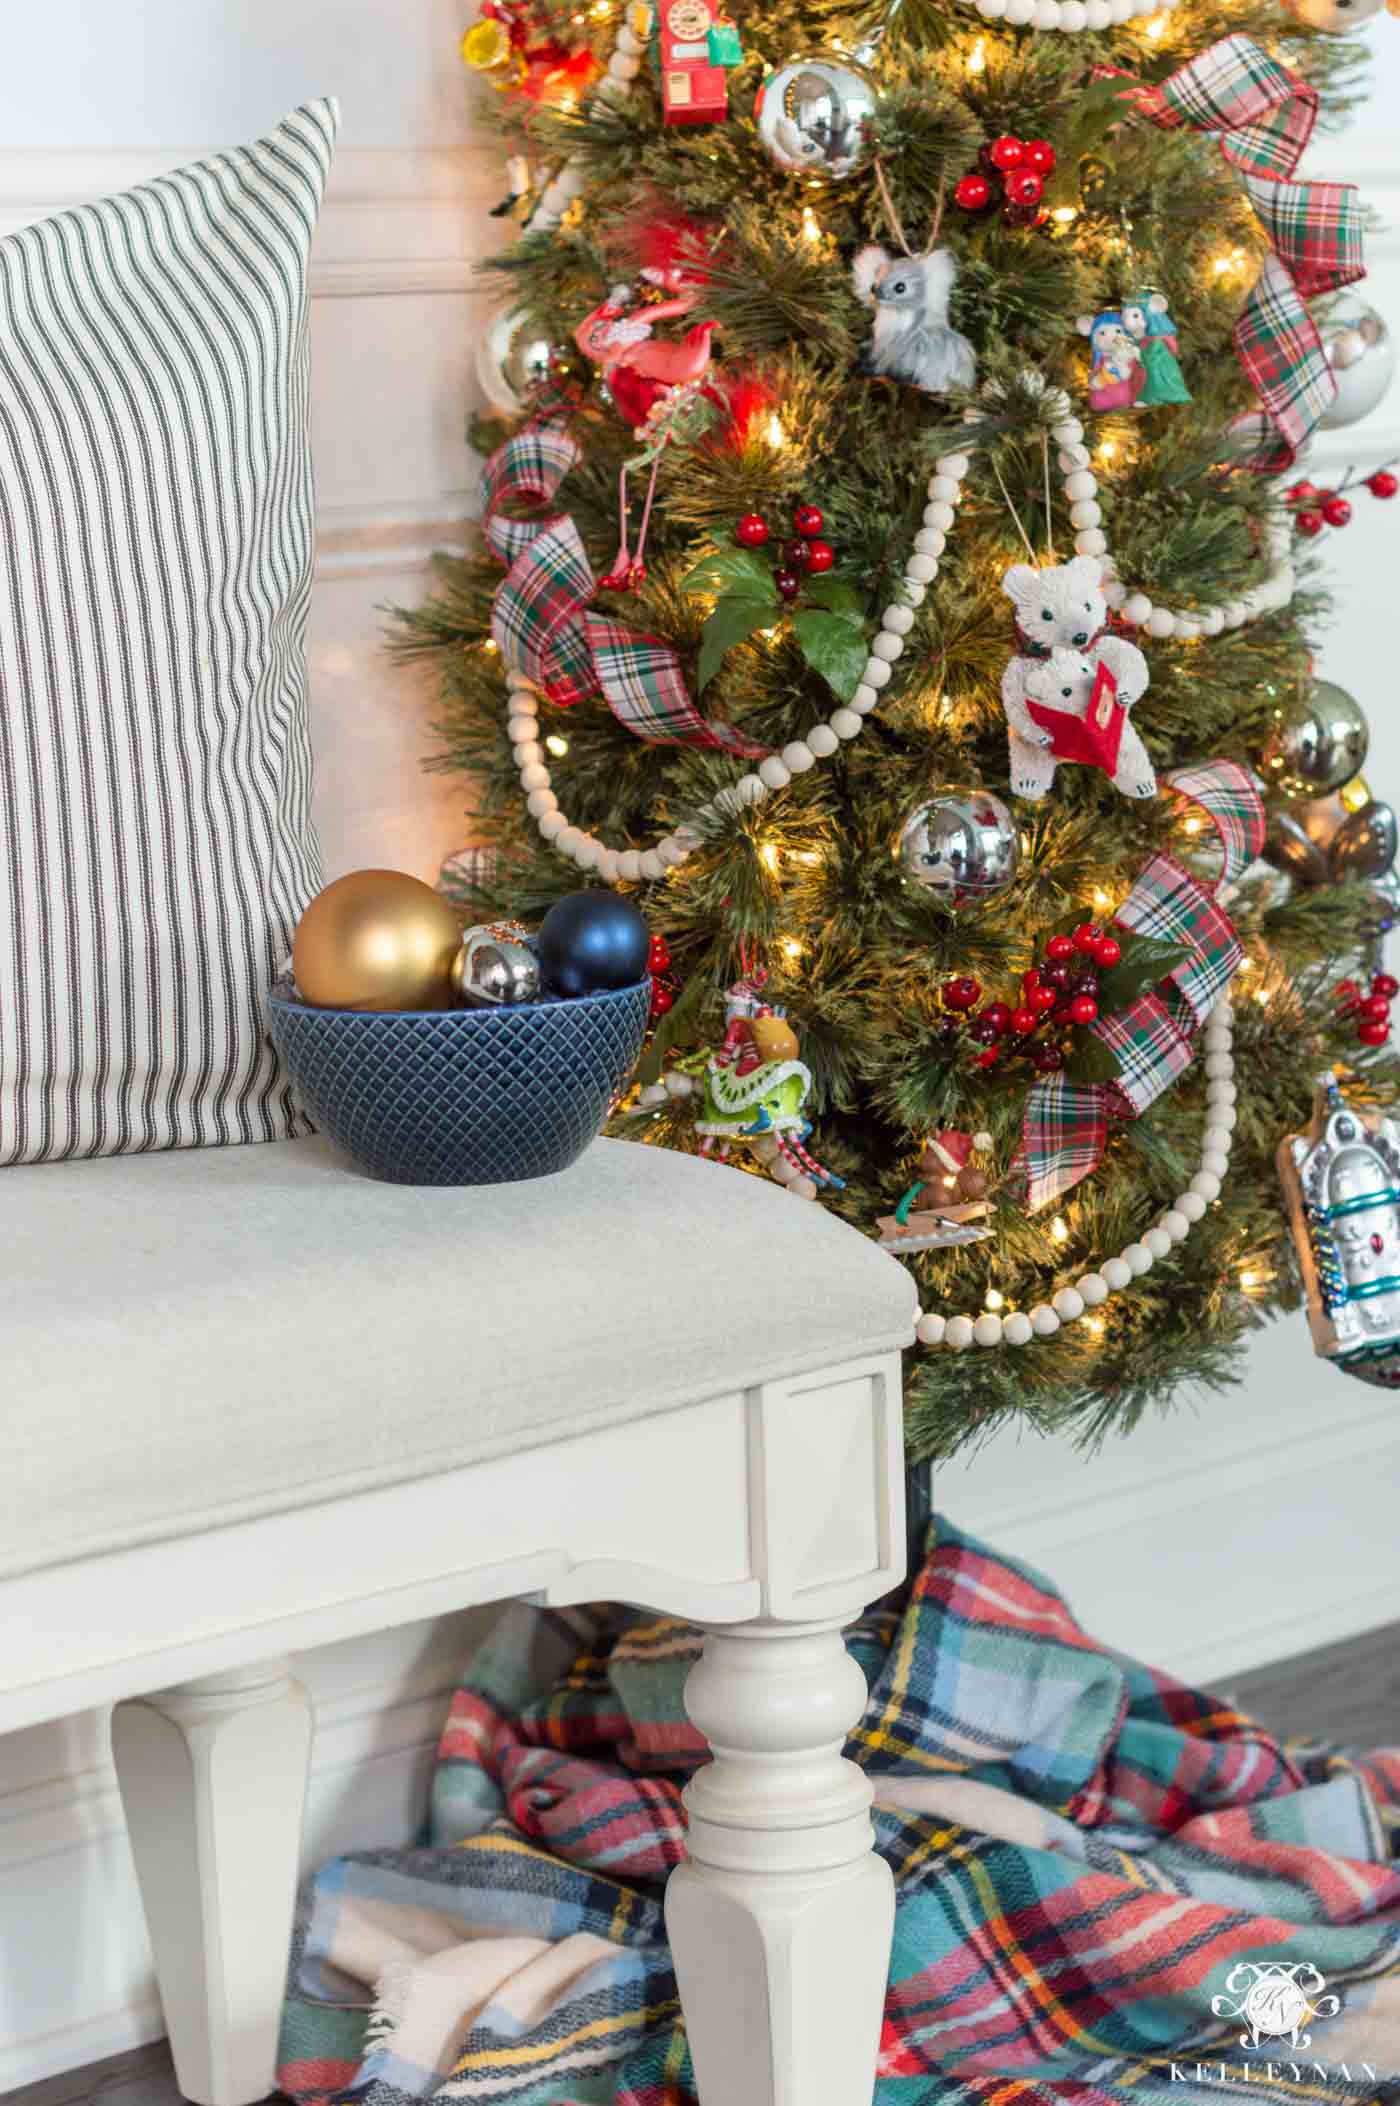 How to decorate a tree with family ornaments